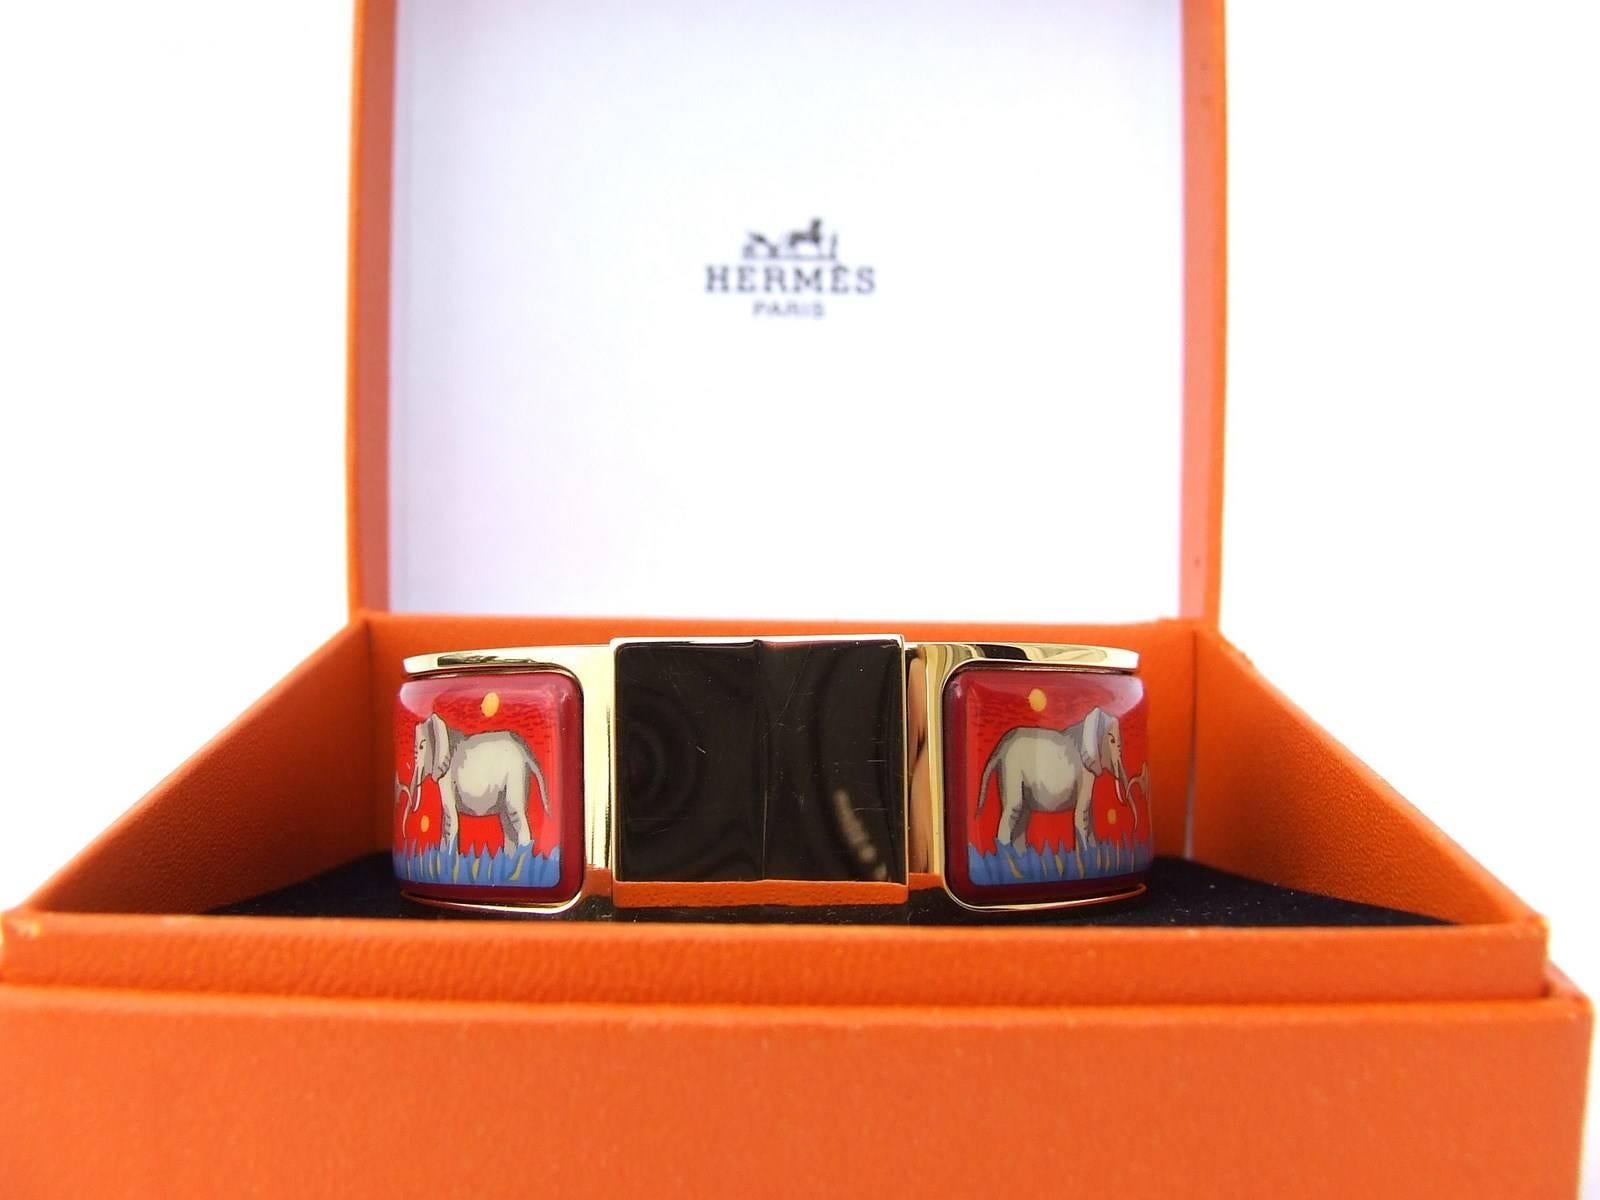 GORGEOUS AND RARE AUTENTIC HERMES BRACELET

CLIC CLAC version

Made in France

Stamp F for 2002

Made of Printed Enamel and Gold Plated Hardware

Colors: Red background, Beige and Grey Elephants, Blue grass and Yellow Polka